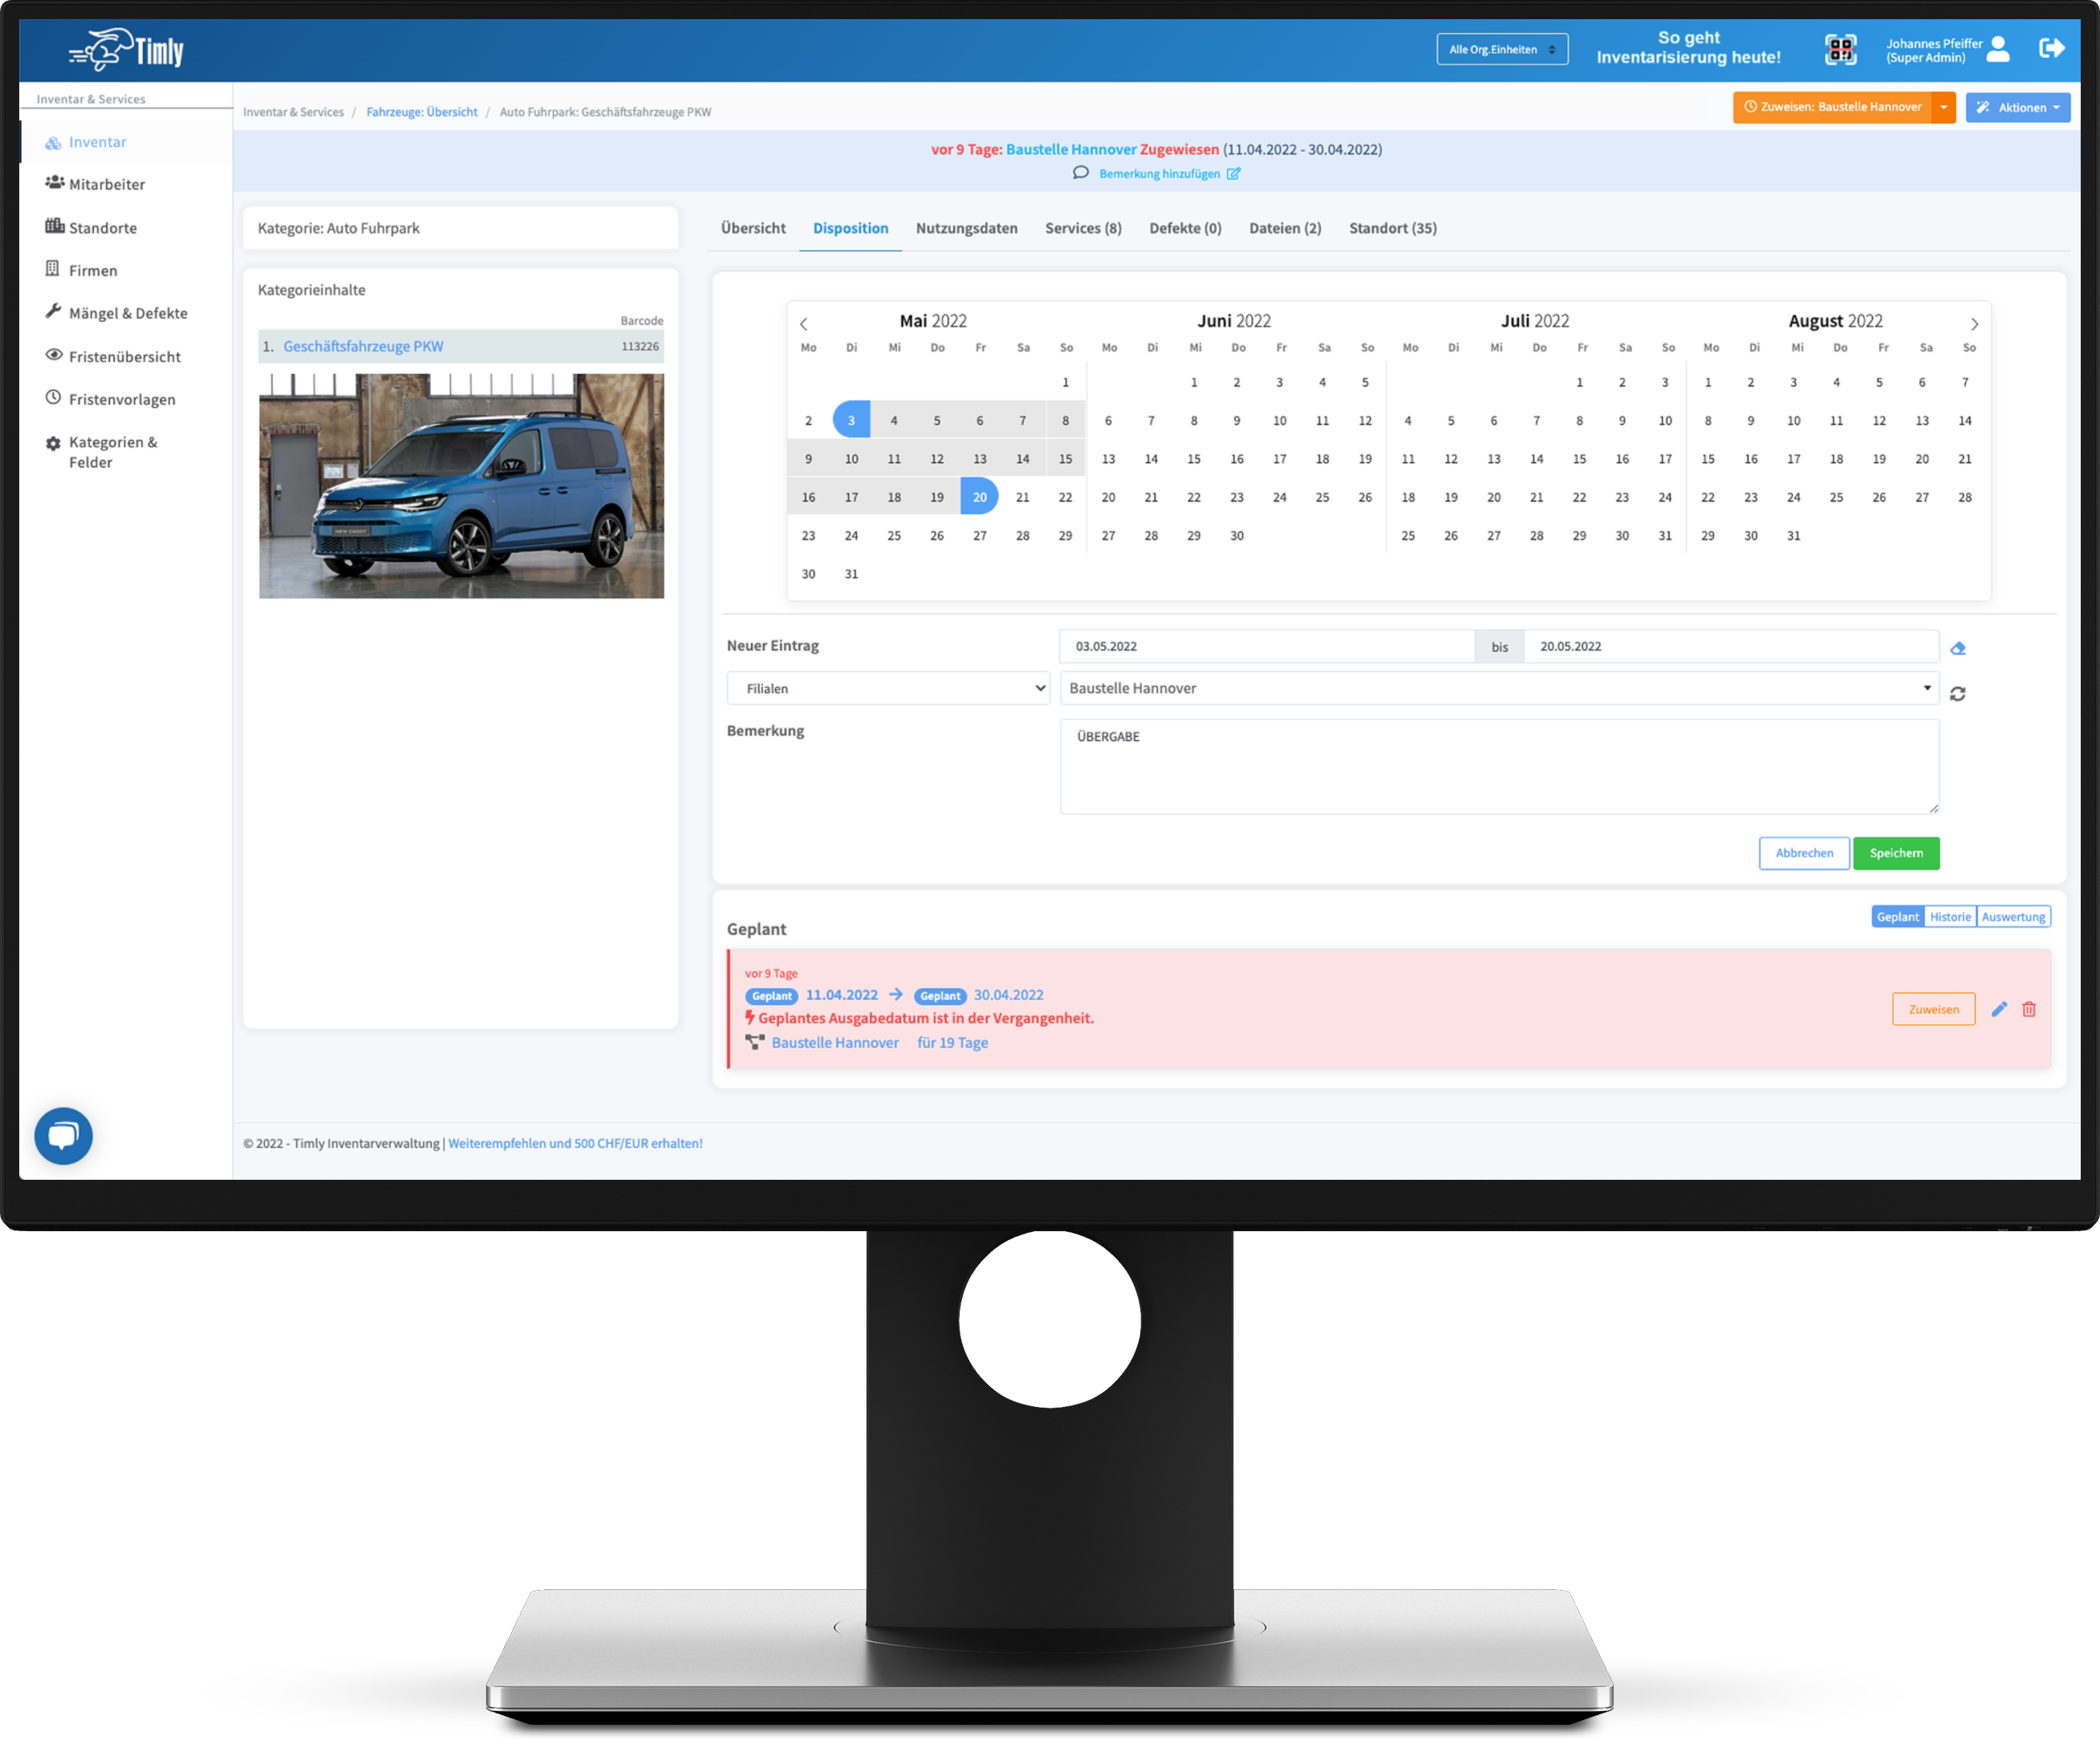 The software for the simplest planning and disposition of inventory